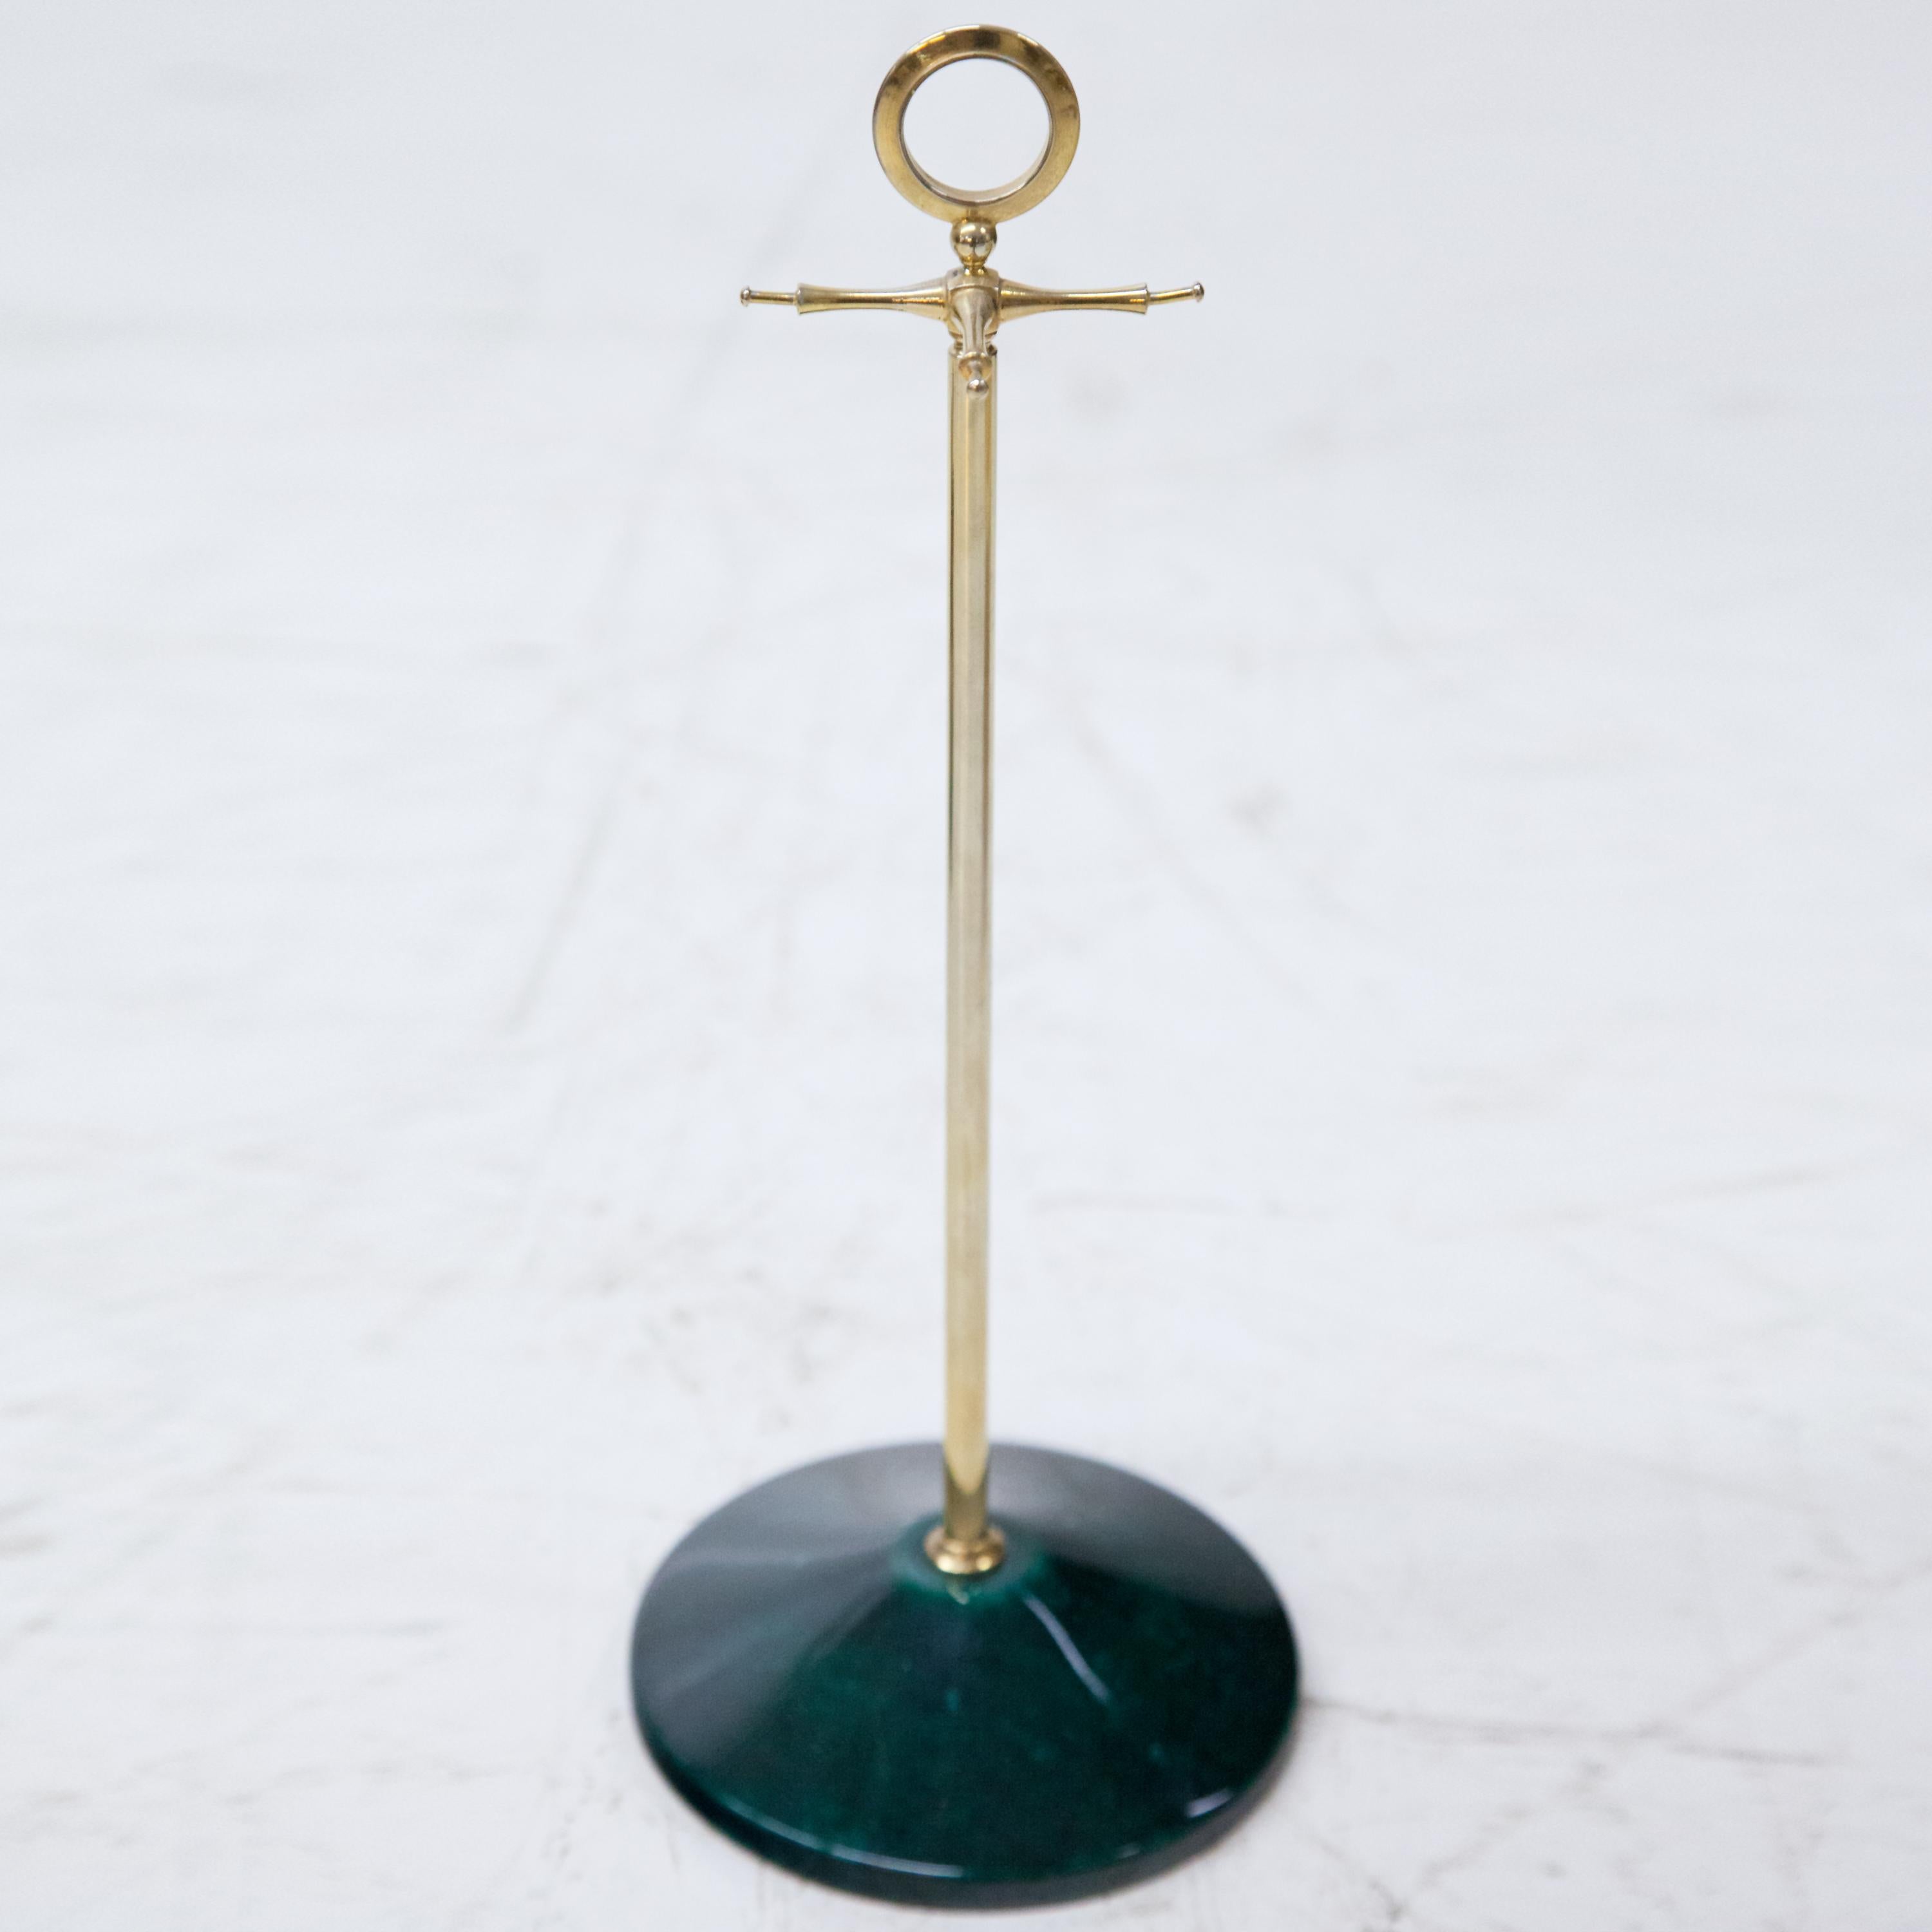 Jewelry stand for necklaces on round green stand covered with goatskin and clear lacquer. Label of Tura Milano Italia on the bottom.